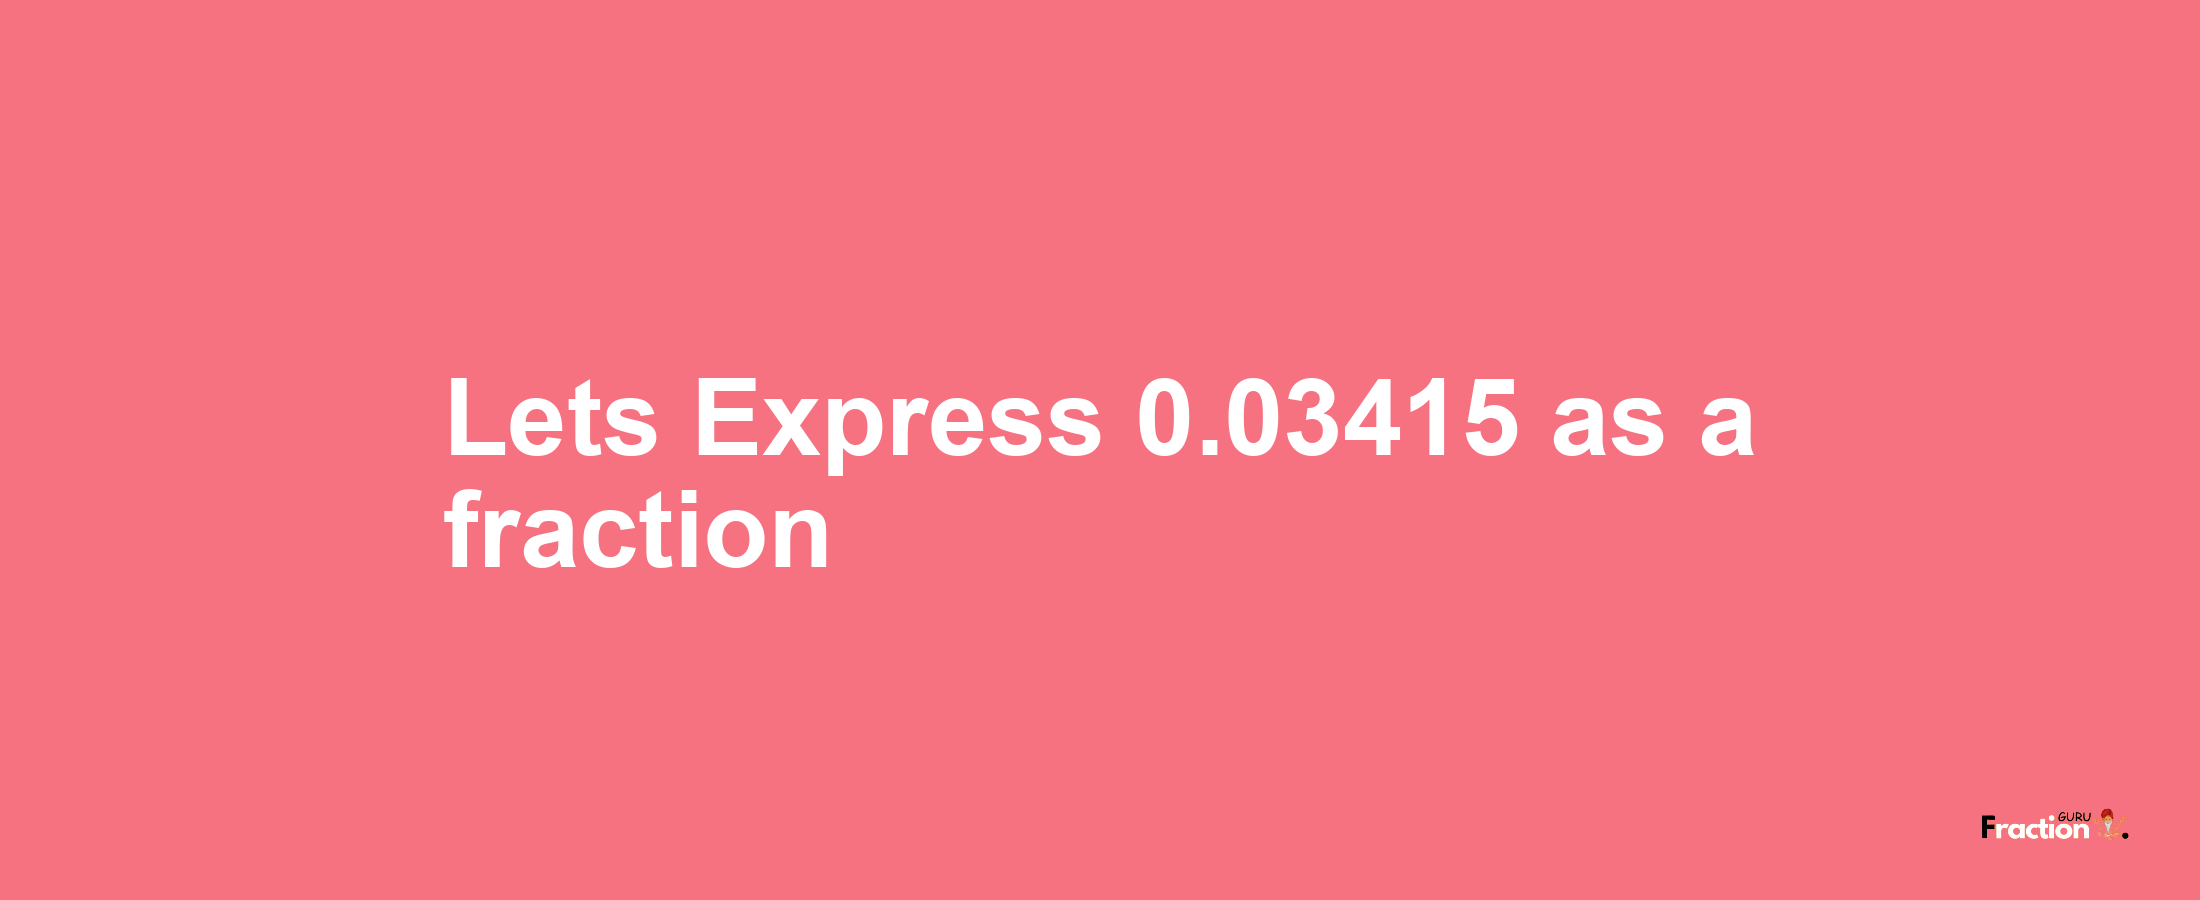 Lets Express 0.03415 as afraction